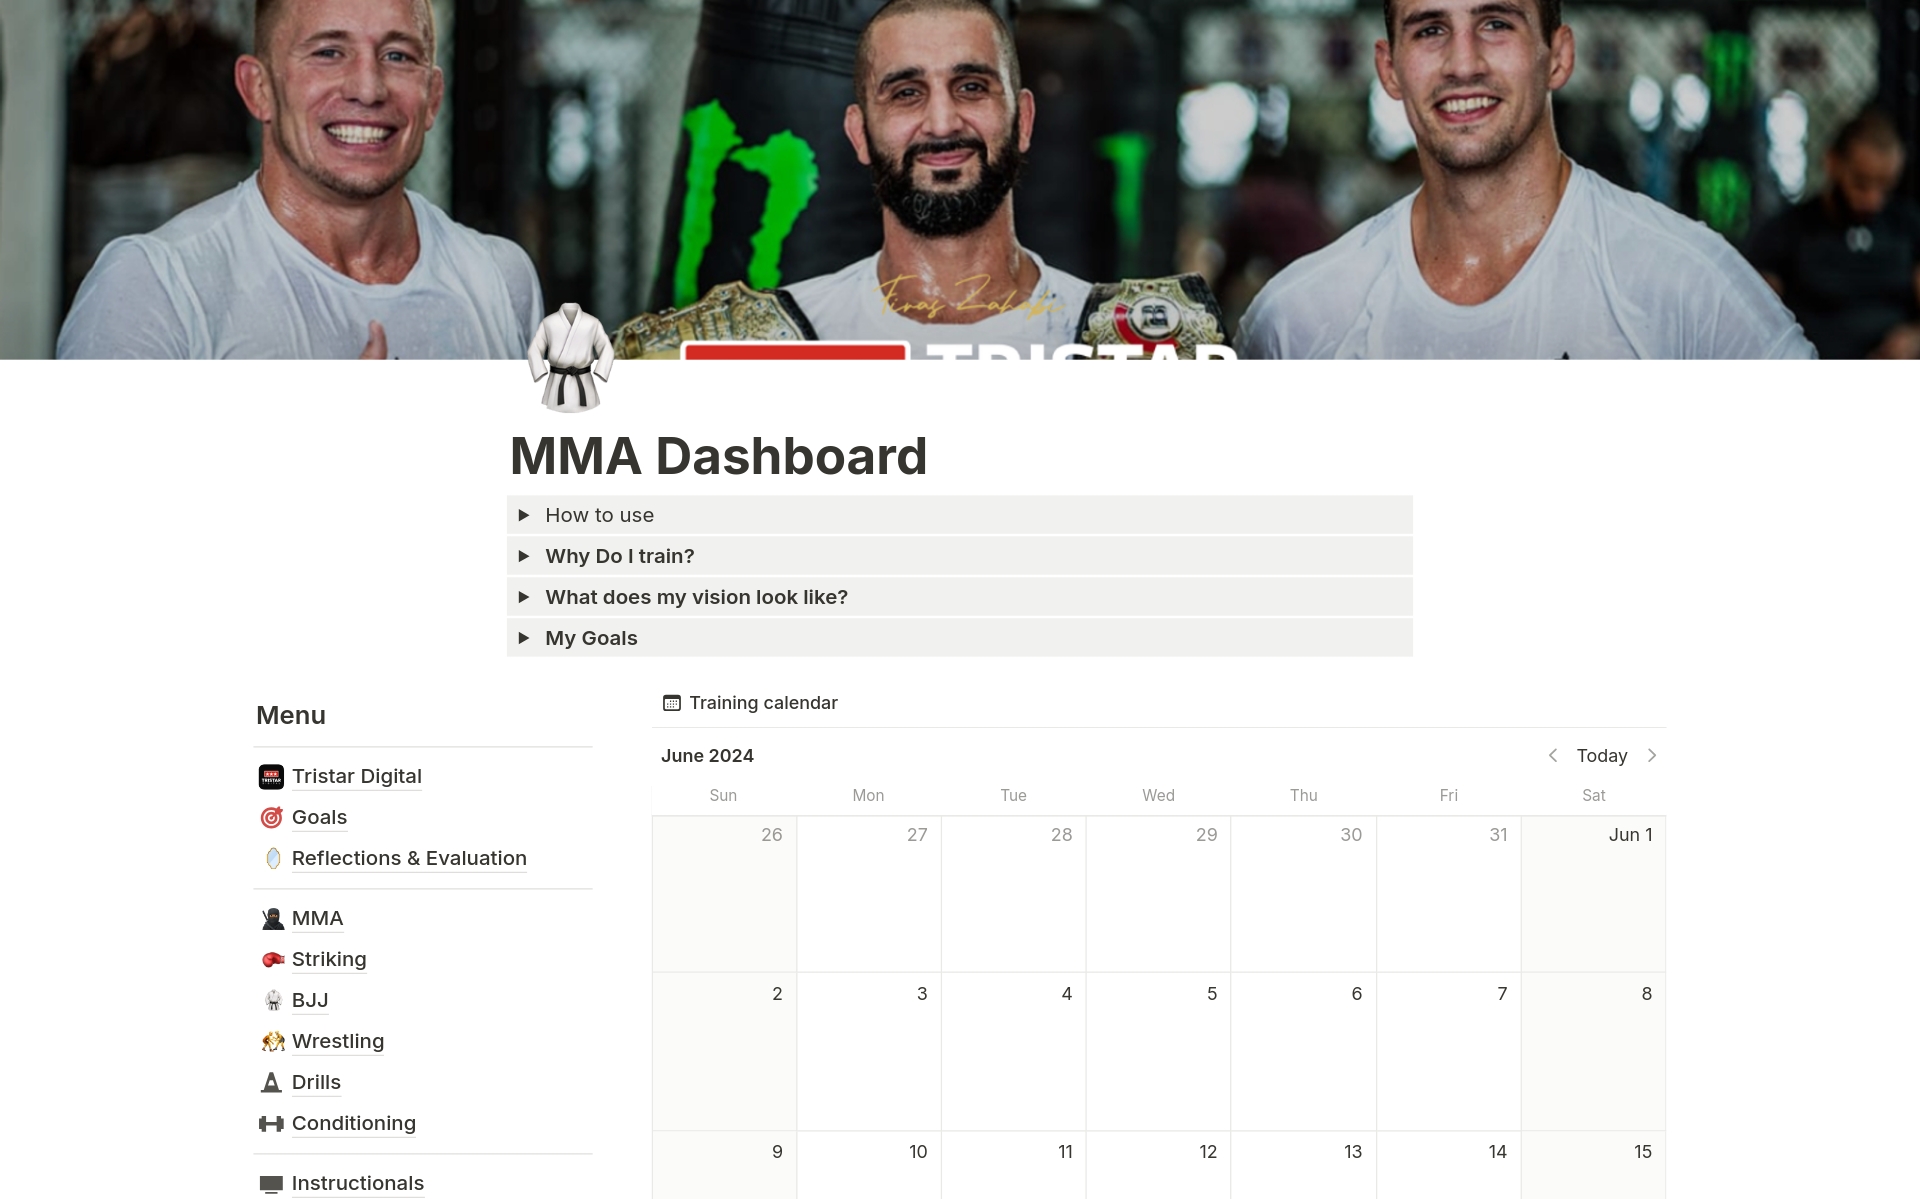 Accelerate, take ownership and control of your Martial Arts Development using the MMA Dashboard template

Remember why you embarked on this journey in the first place, and allow yourself to be the best Martial Artist you can be